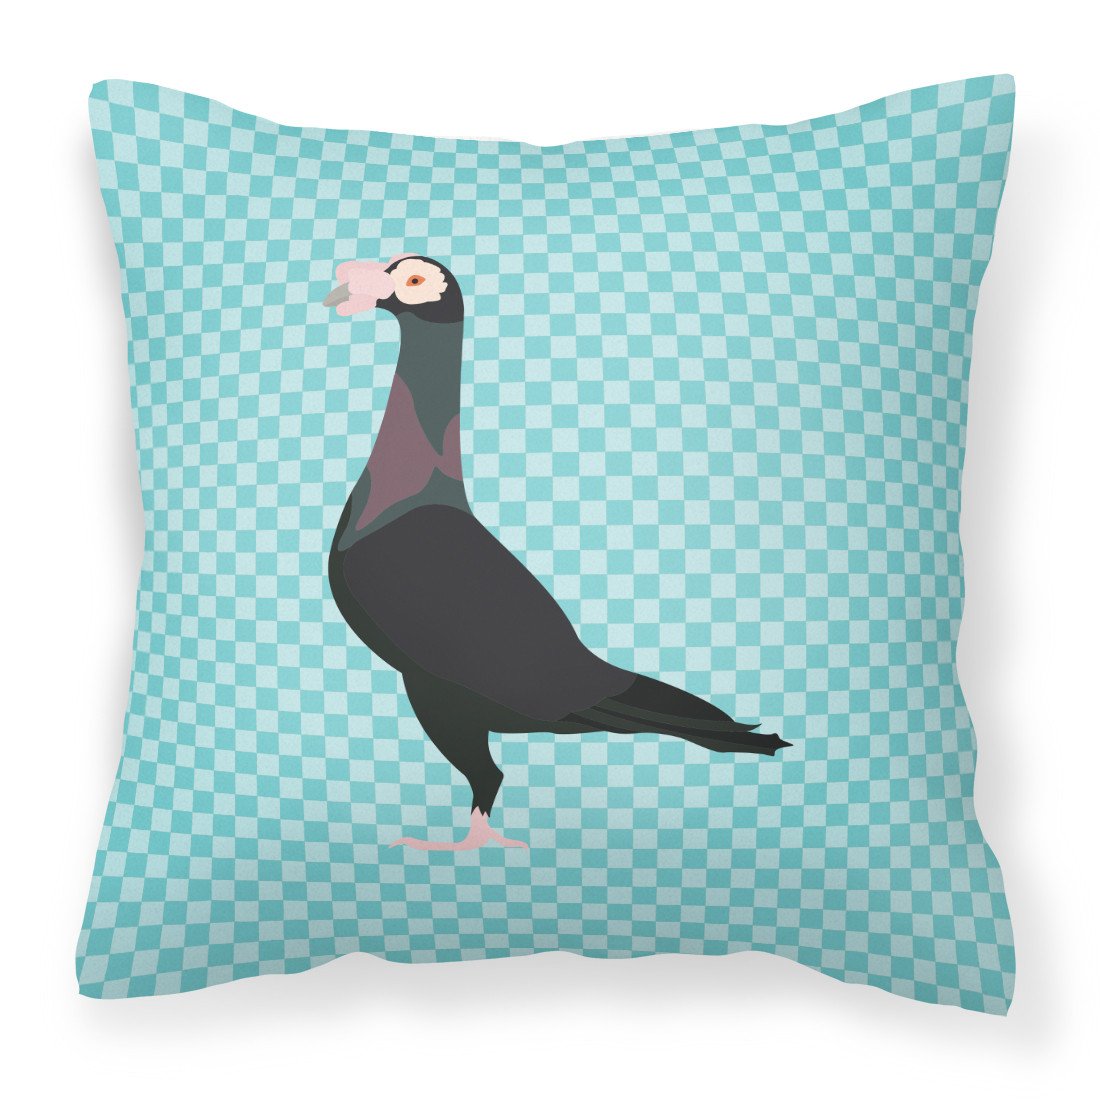 English Carrier Pigeon Blue Check Fabric Decorative Pillow BB8119PW1818 by Caroline's Treasures